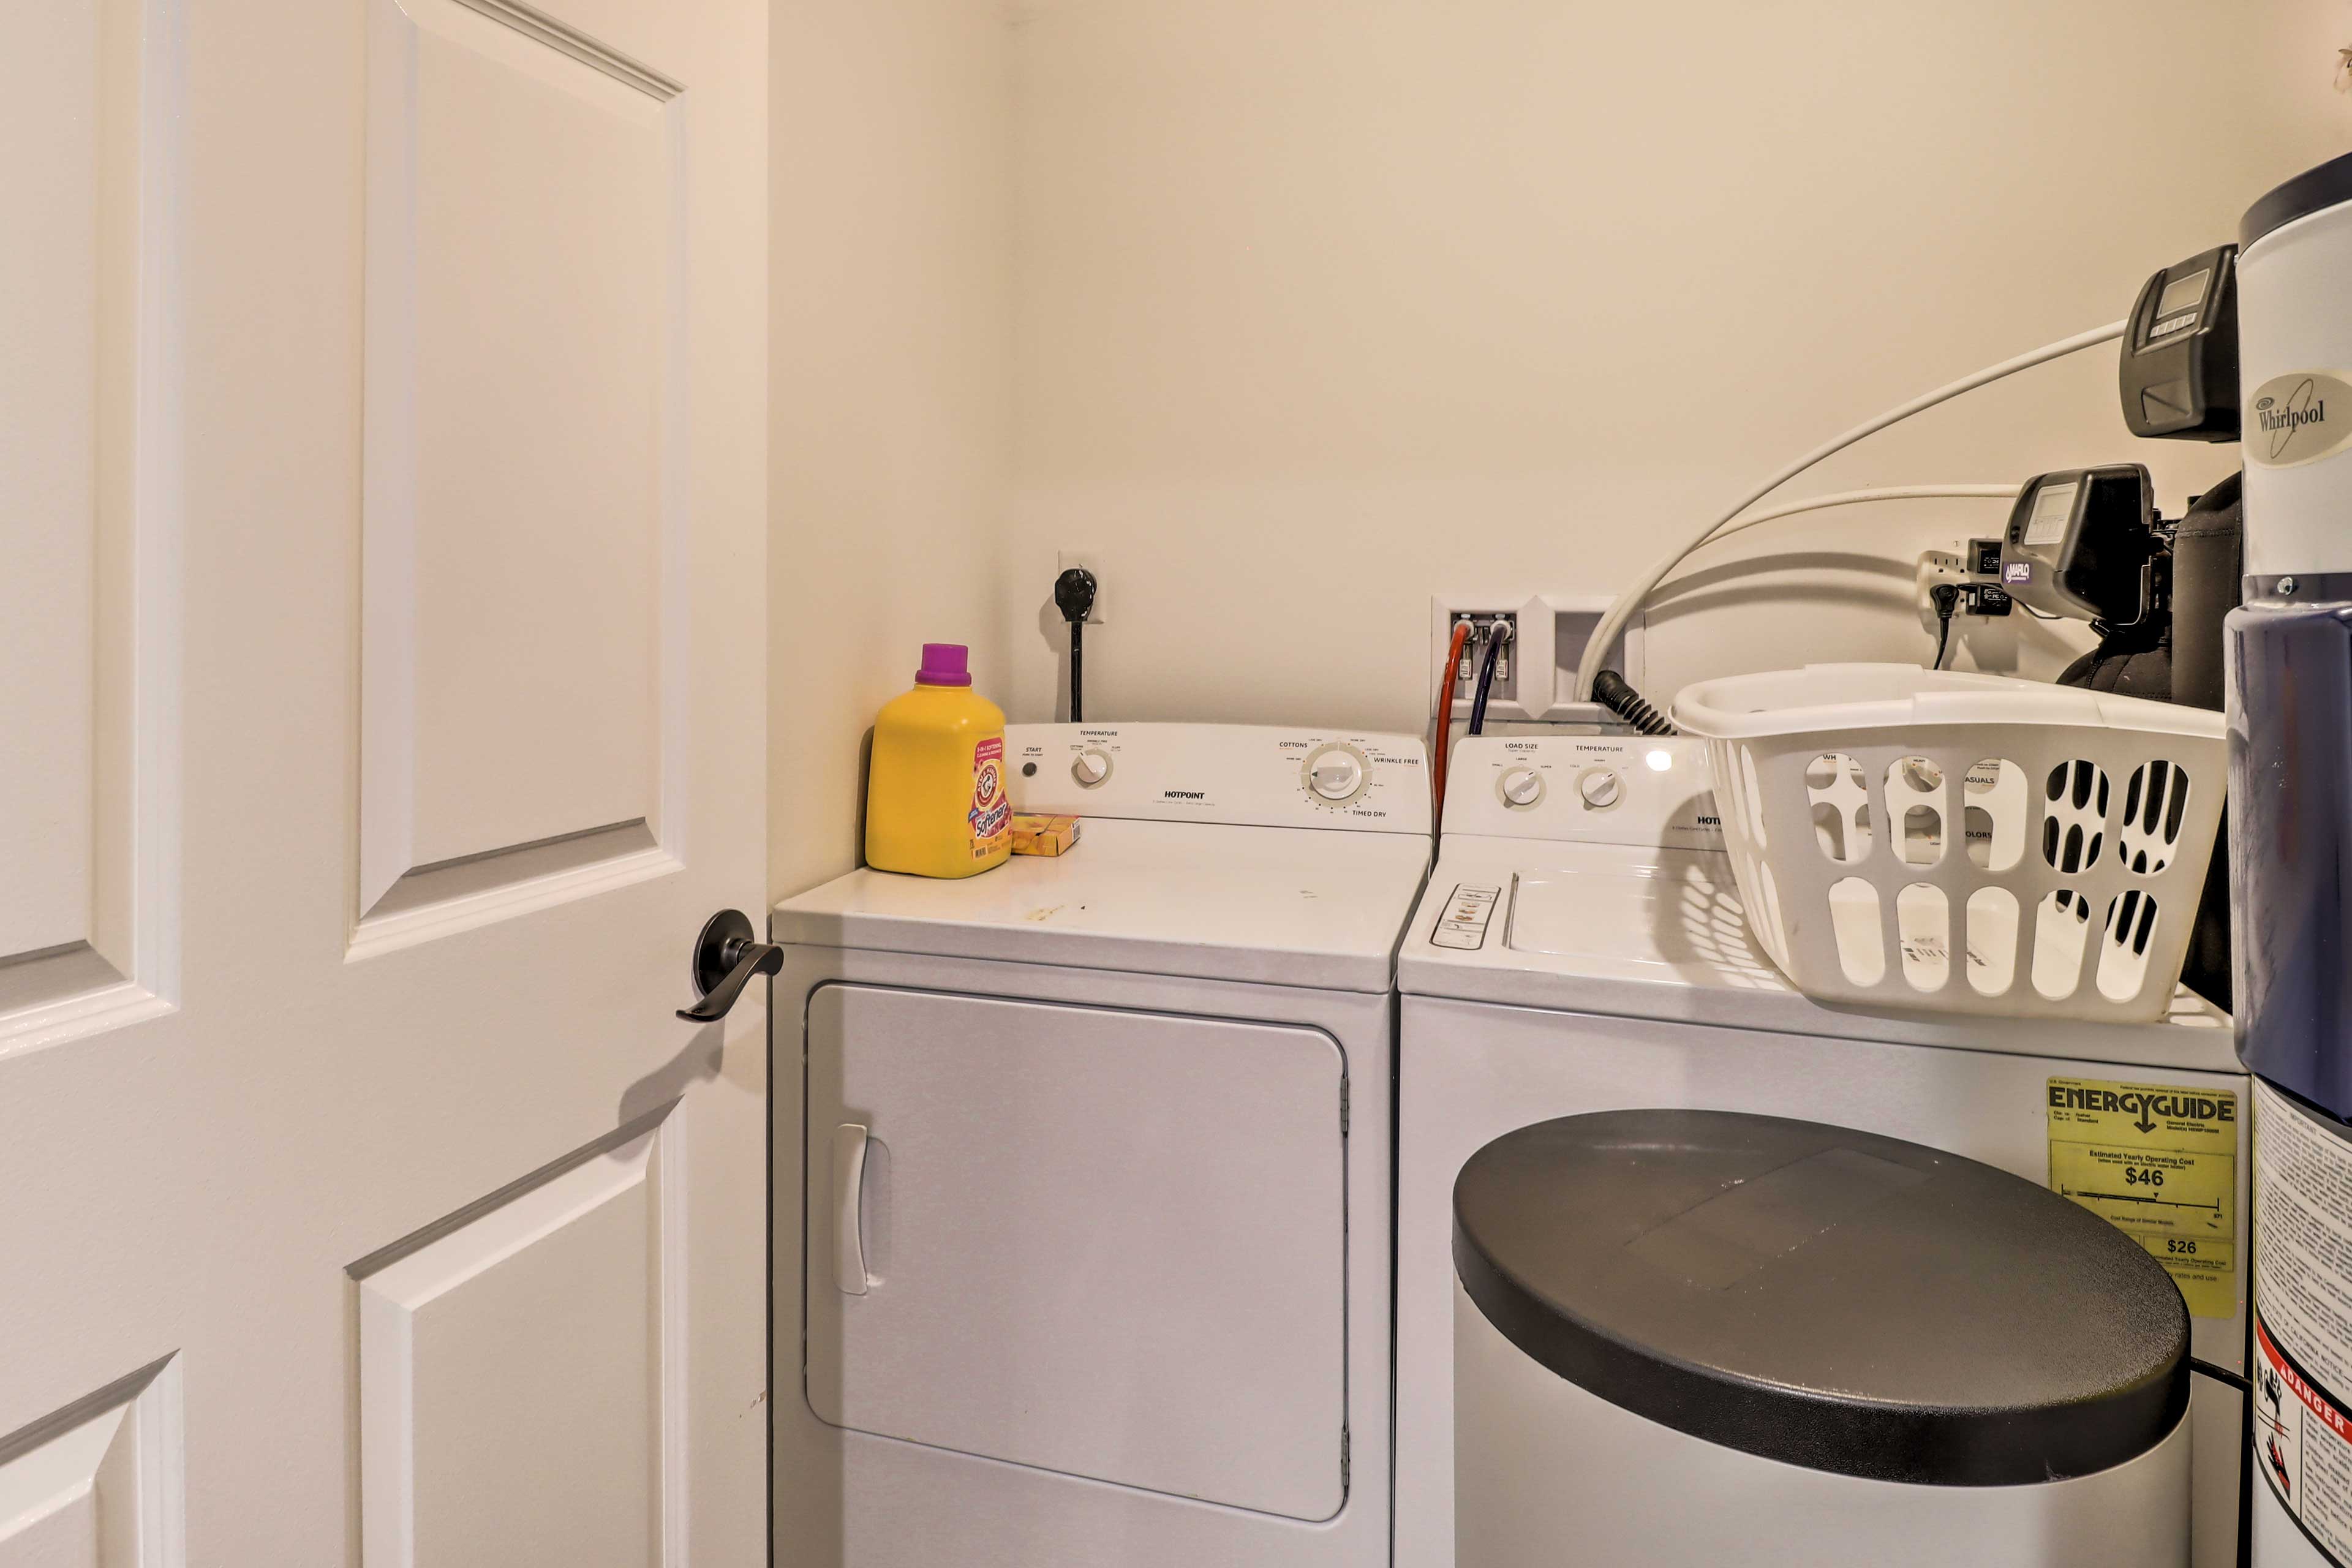 Laundry Room | Laundry Detergent | Iron & Board